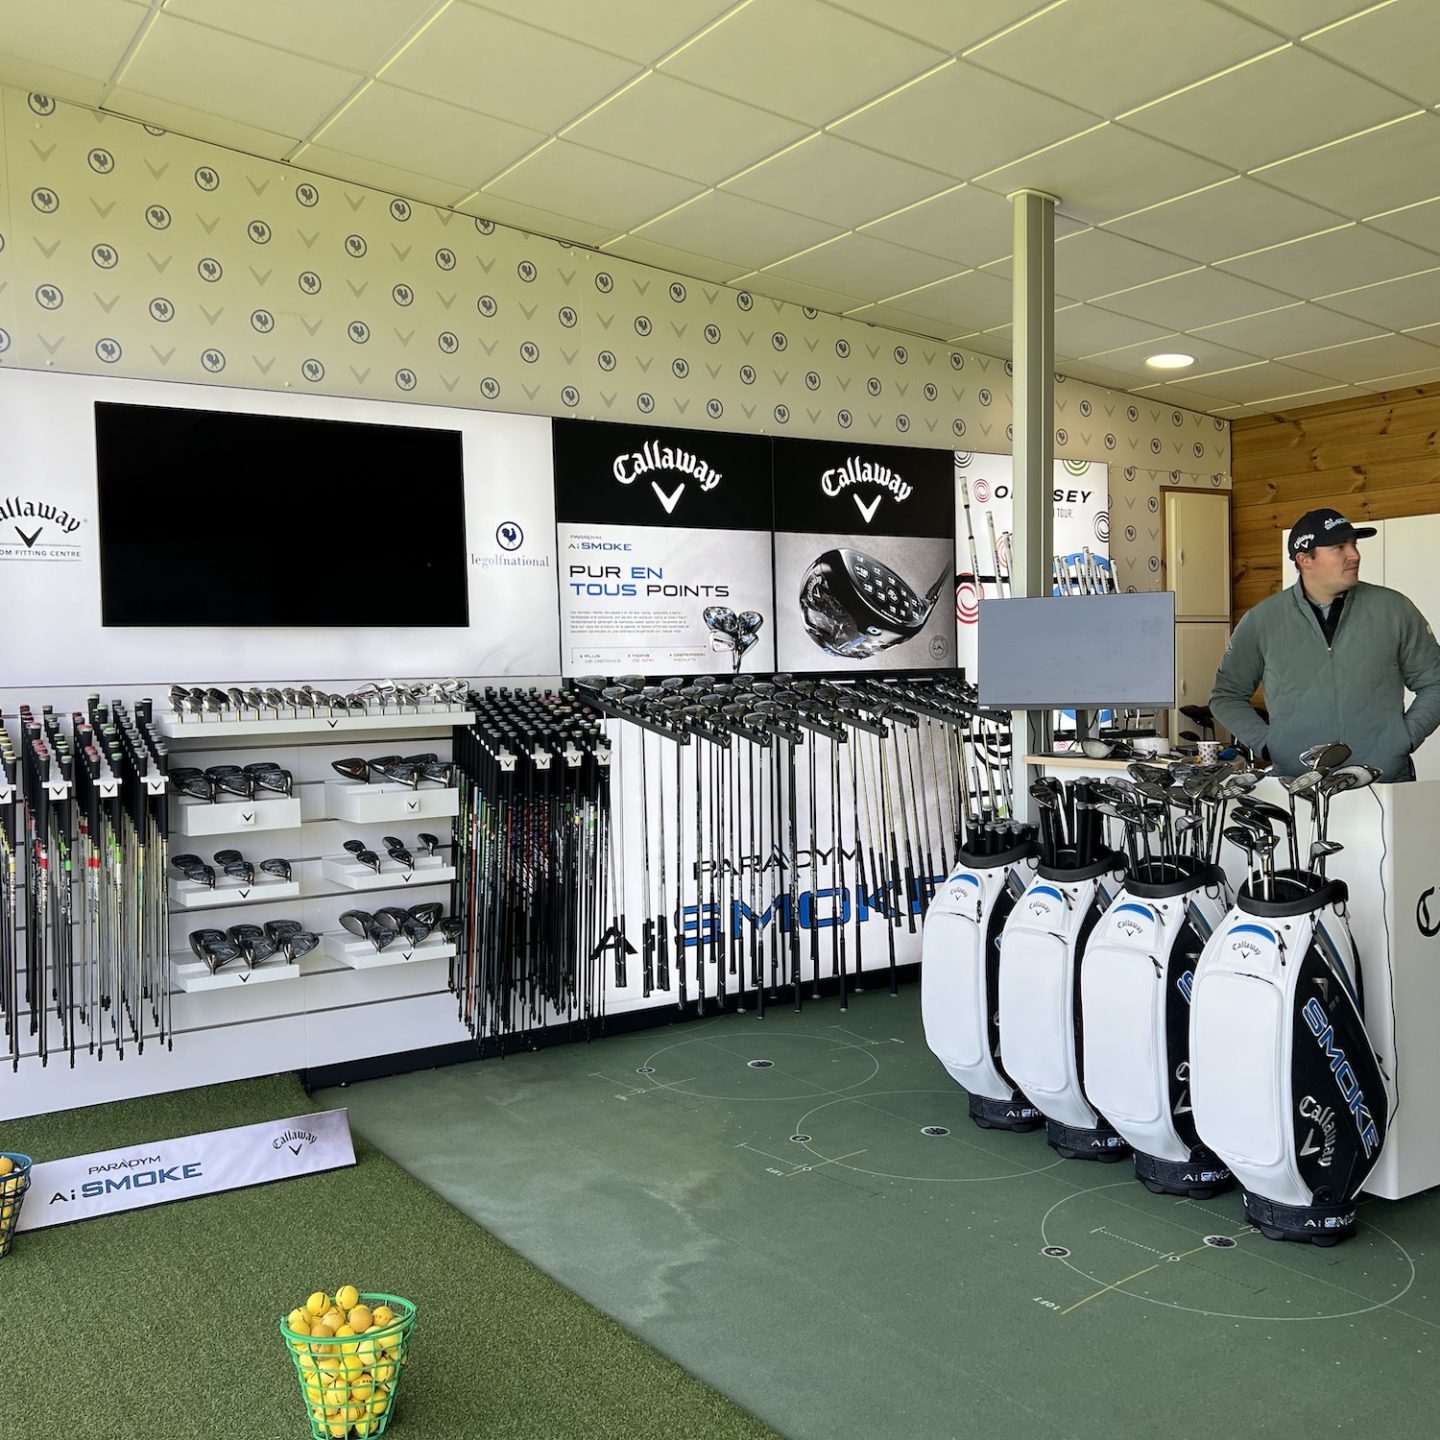 Le Fitting Center Callaway Odyssey est ouvert